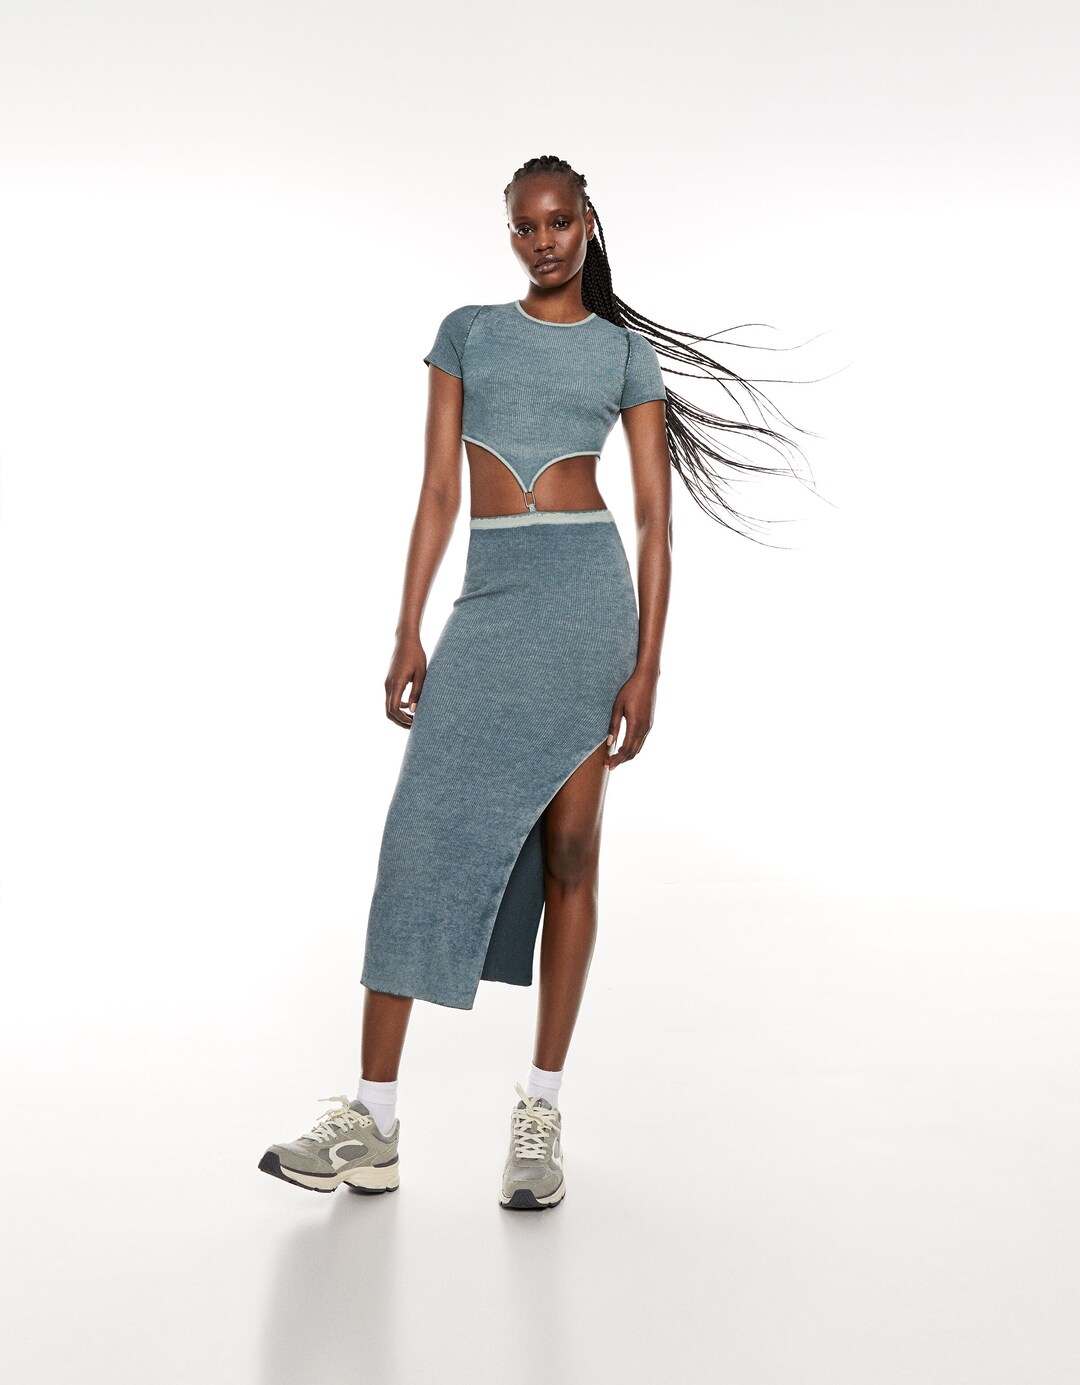 Faded-effect knit midi dress with cut-out